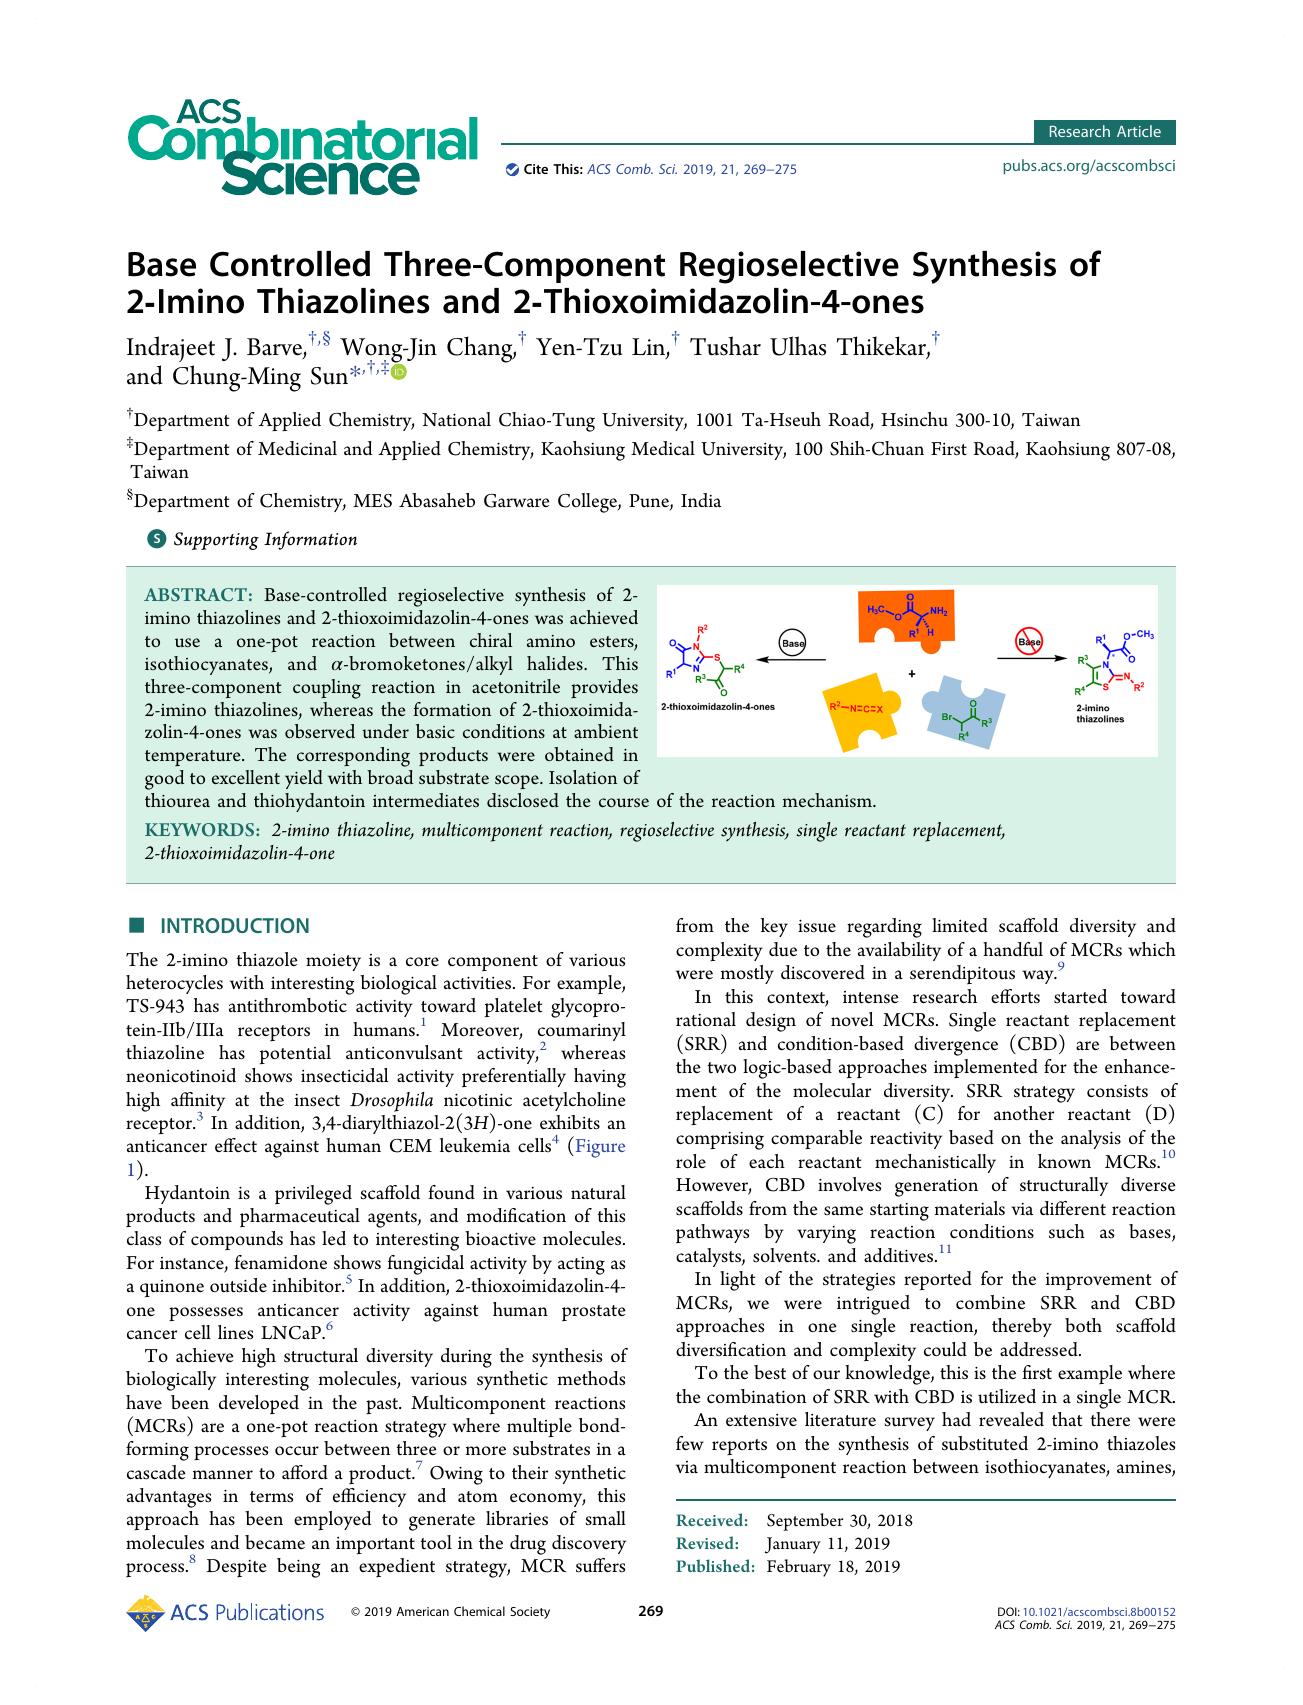 Base Controlled Three-Component Regioselective Synthesis of 2-Imino Thiazolines and 2-Thioxoimidazolin-4-ones by Indrajeet J. Barve Wong-Jin Chang Yen-Tzu Lin Tushar Ulhas Thikekar and Chung-Ming Sun